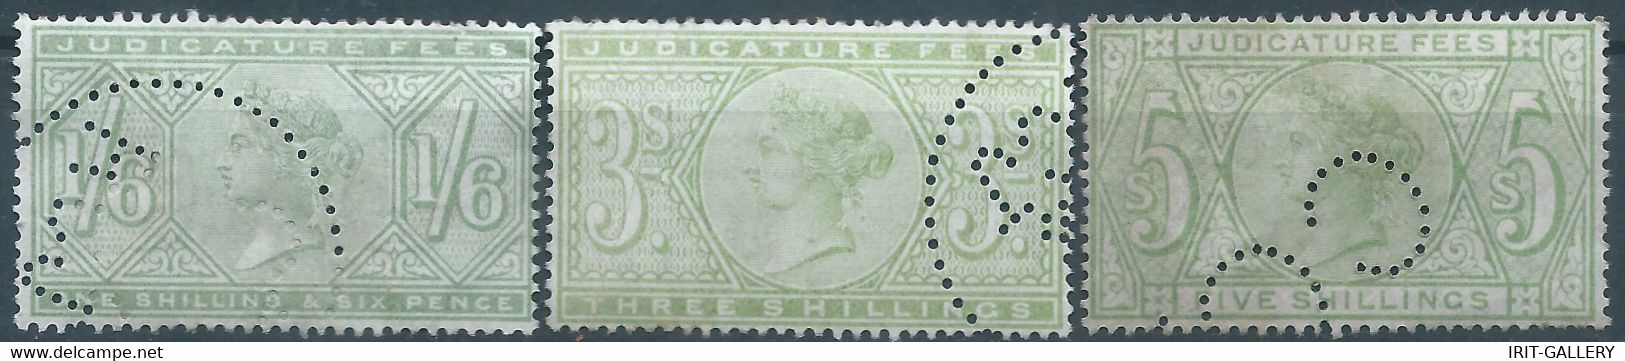 Great Britain-ENGLAND,Queen Victoria,1870-1800 Revenue Stamp Tax Fisca,JUDICATURE FEES,1/6-3-5 Shillings,PERFIN - Used - Steuermarken